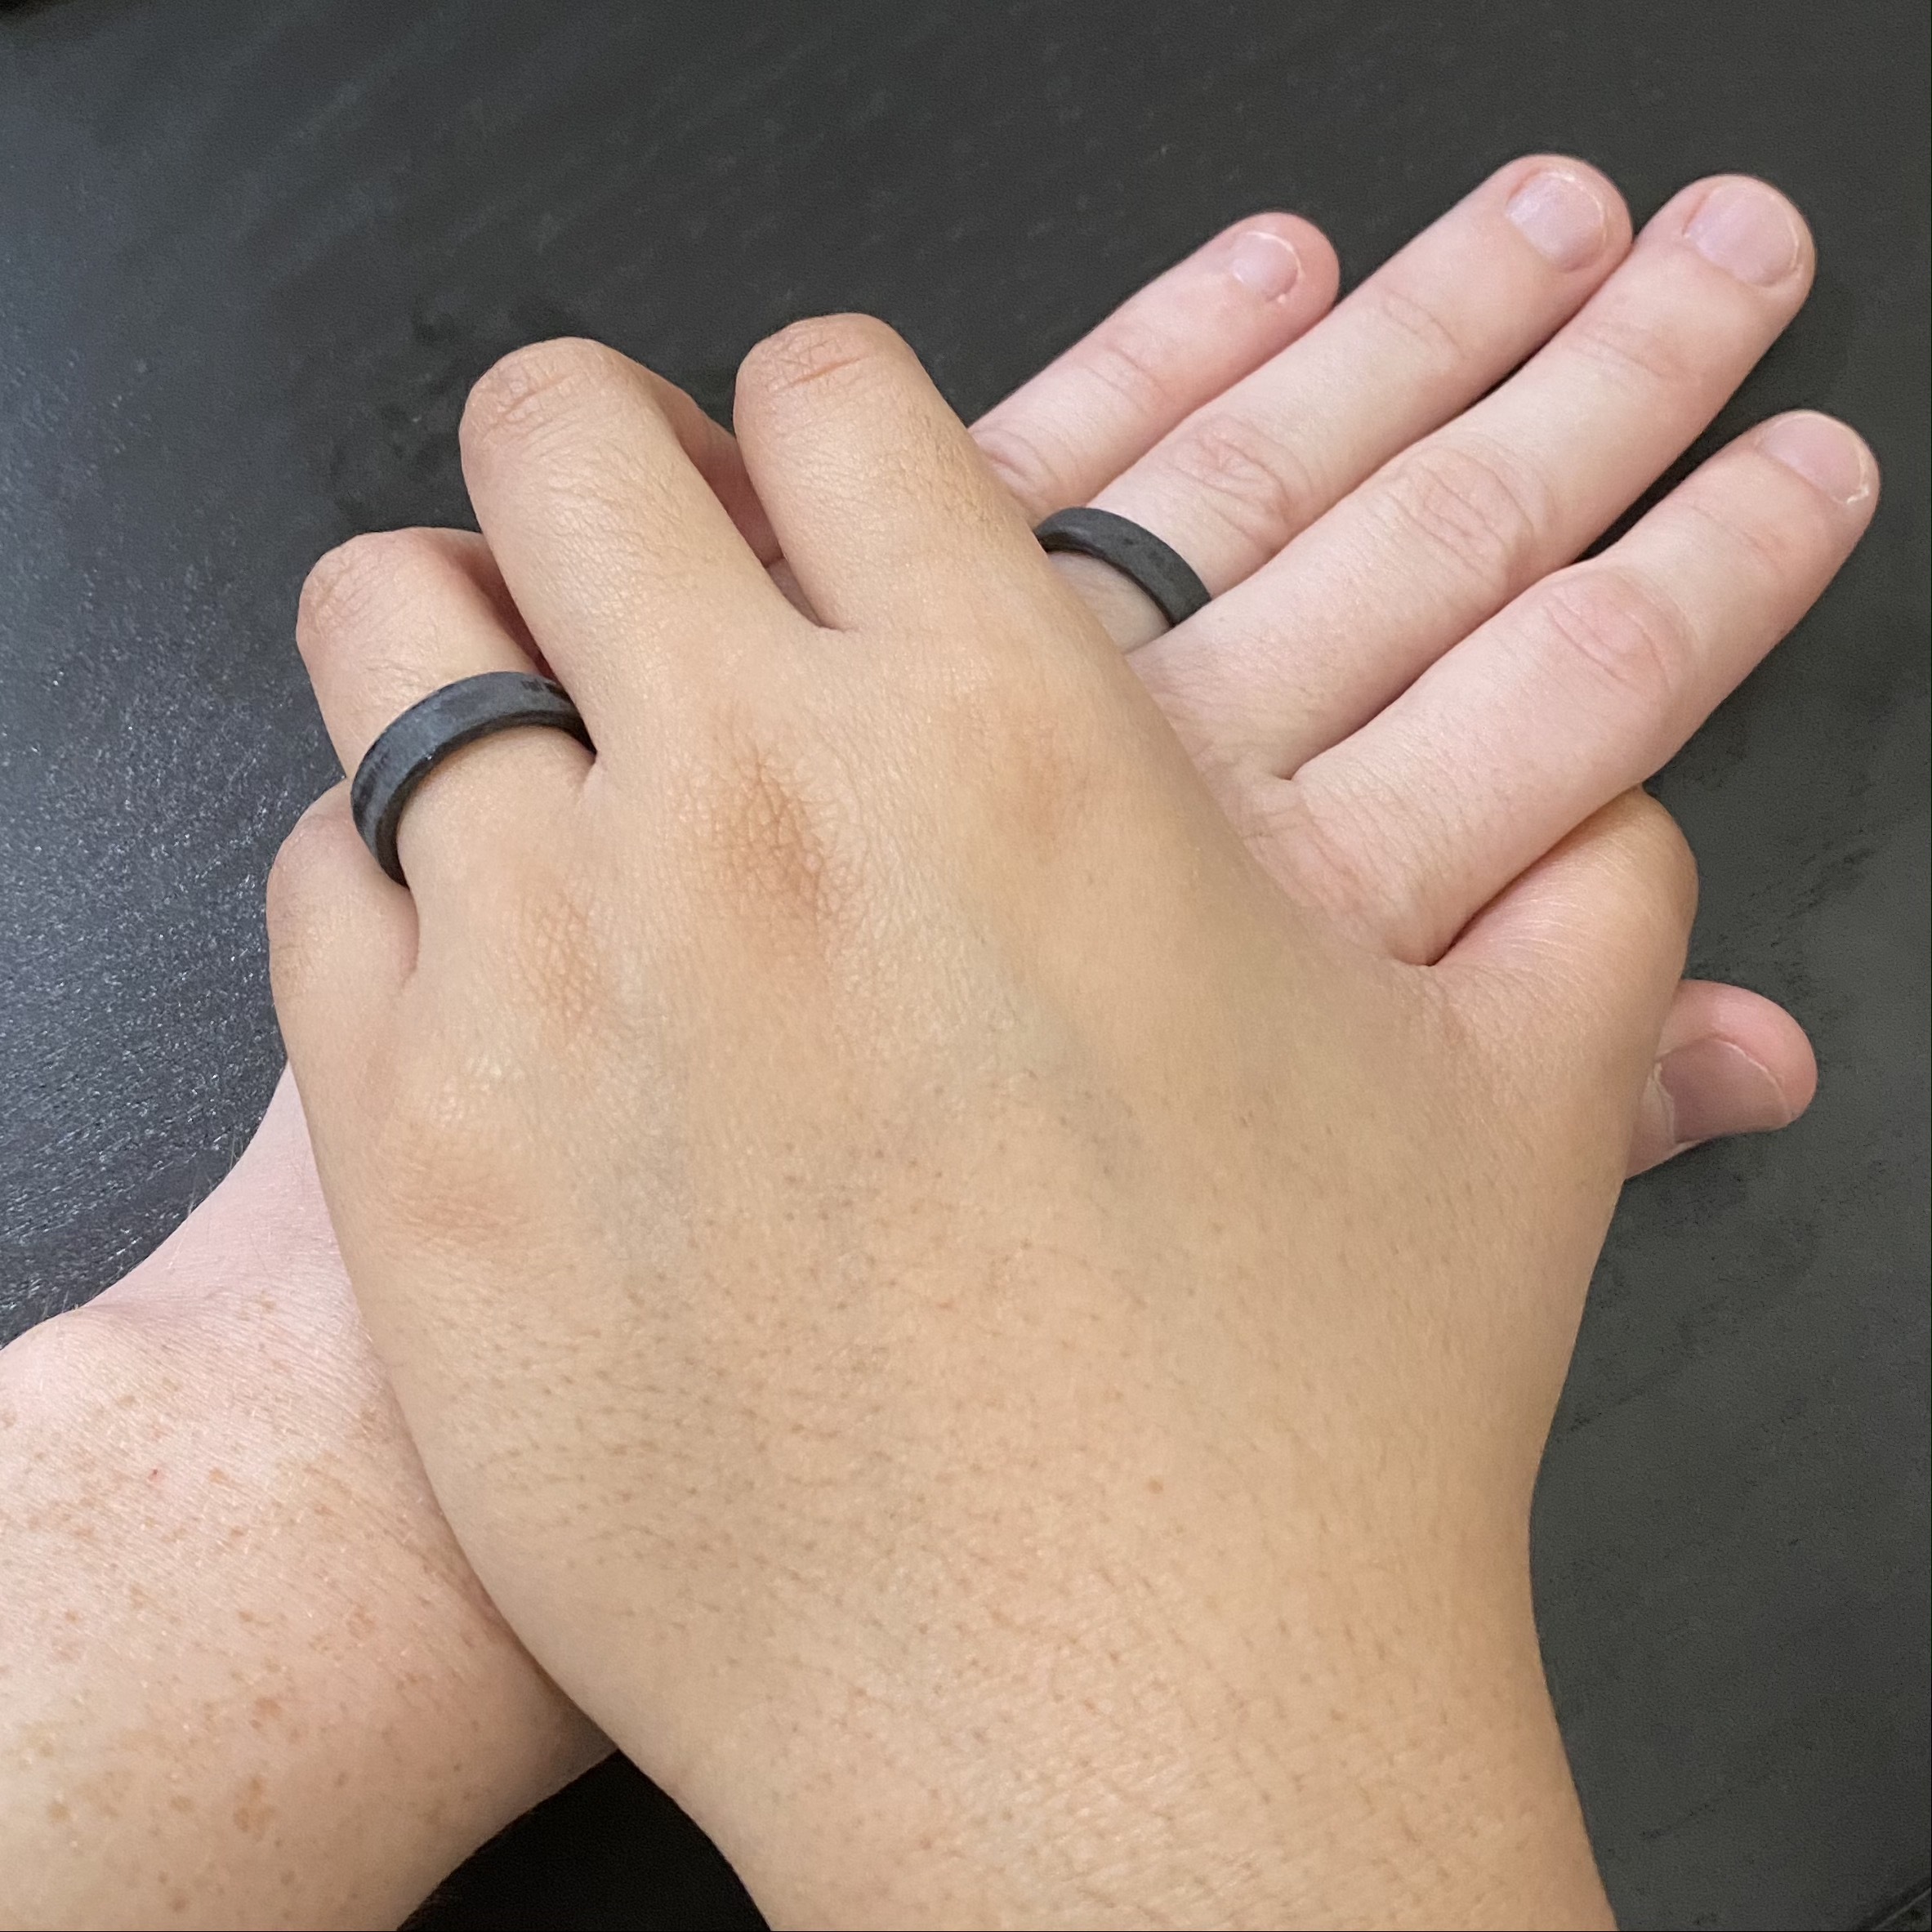 Our wedding rings